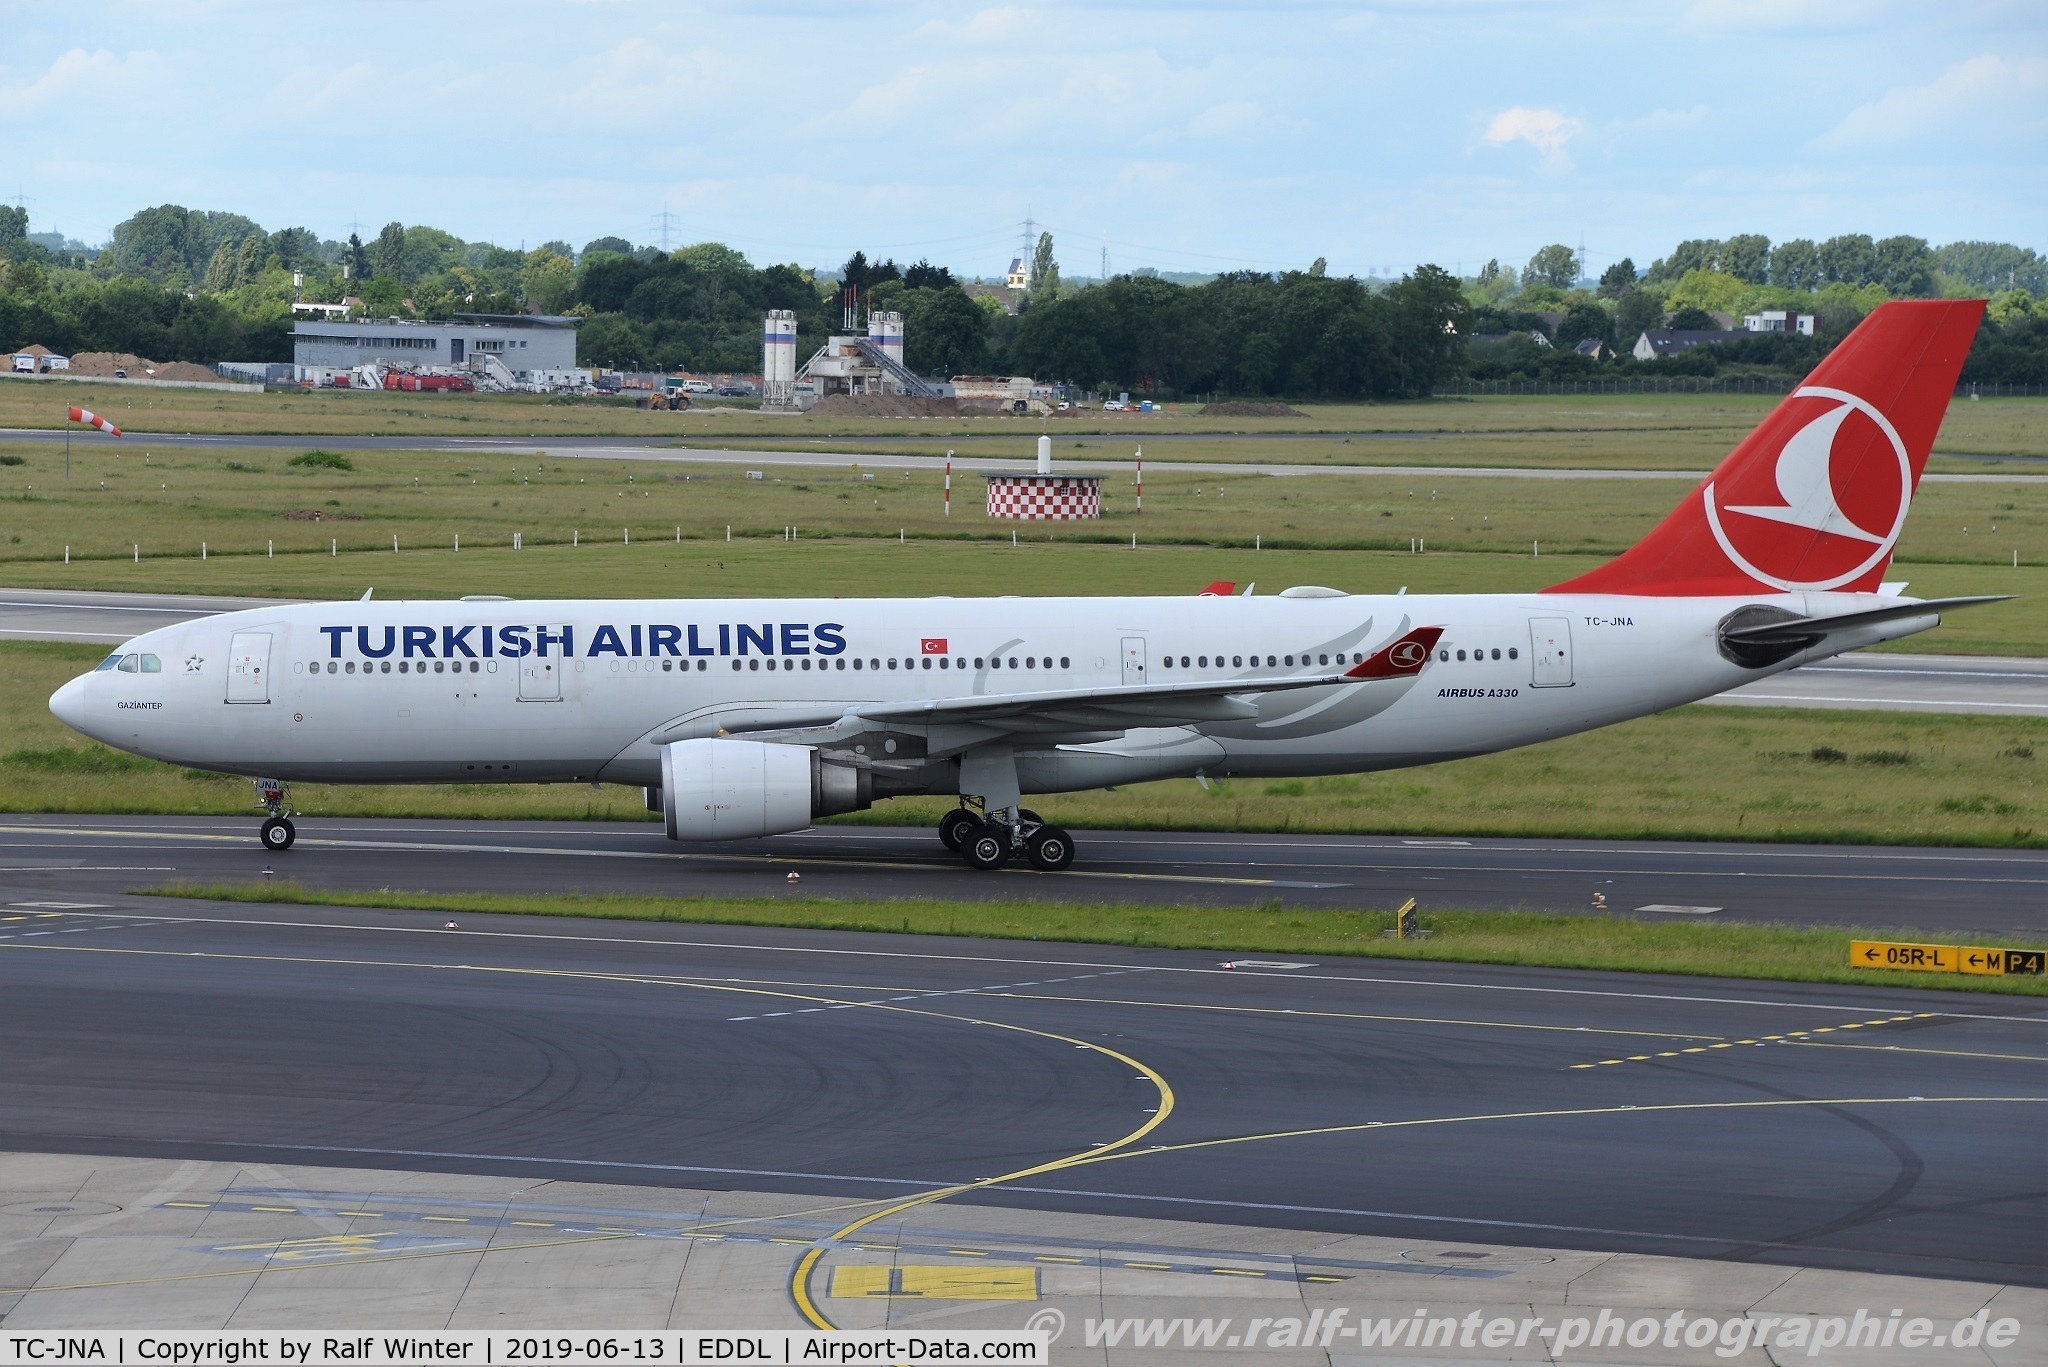 TC-JNA, 2005 Airbus A330-203 C/N 697, Airbus A330-203 - TK THY Turkish Airlines 'Gaziantep' - 697 - TC-JNA - 13.06.2019 - DUS